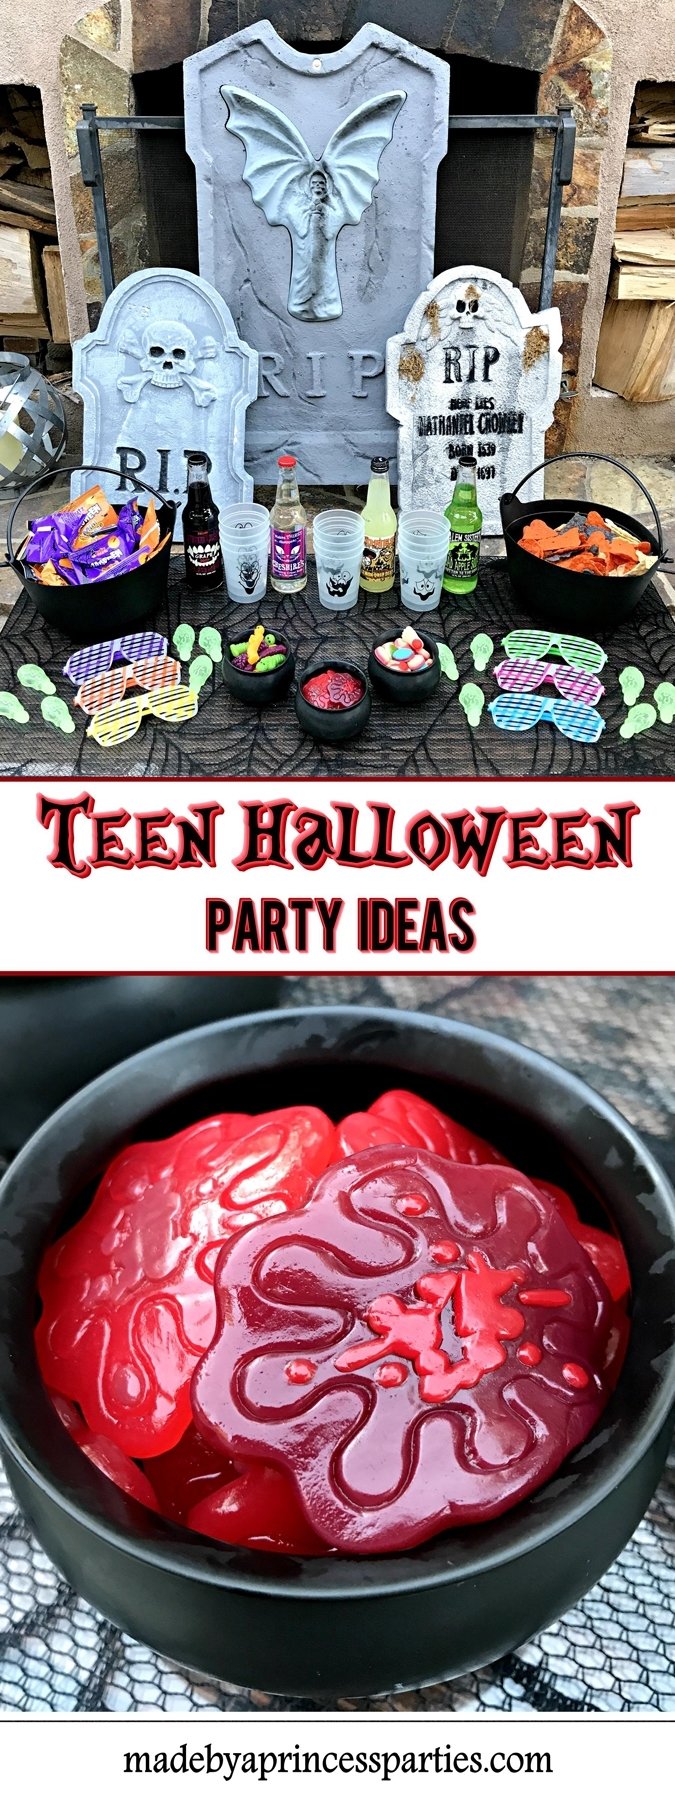 10 Most Recommended Halloween Party Ideas For Teenagers teen halloween party ideas party filled with snacks and glow in the dark goodies made by a princess halloweenparty teenhalloween 2022